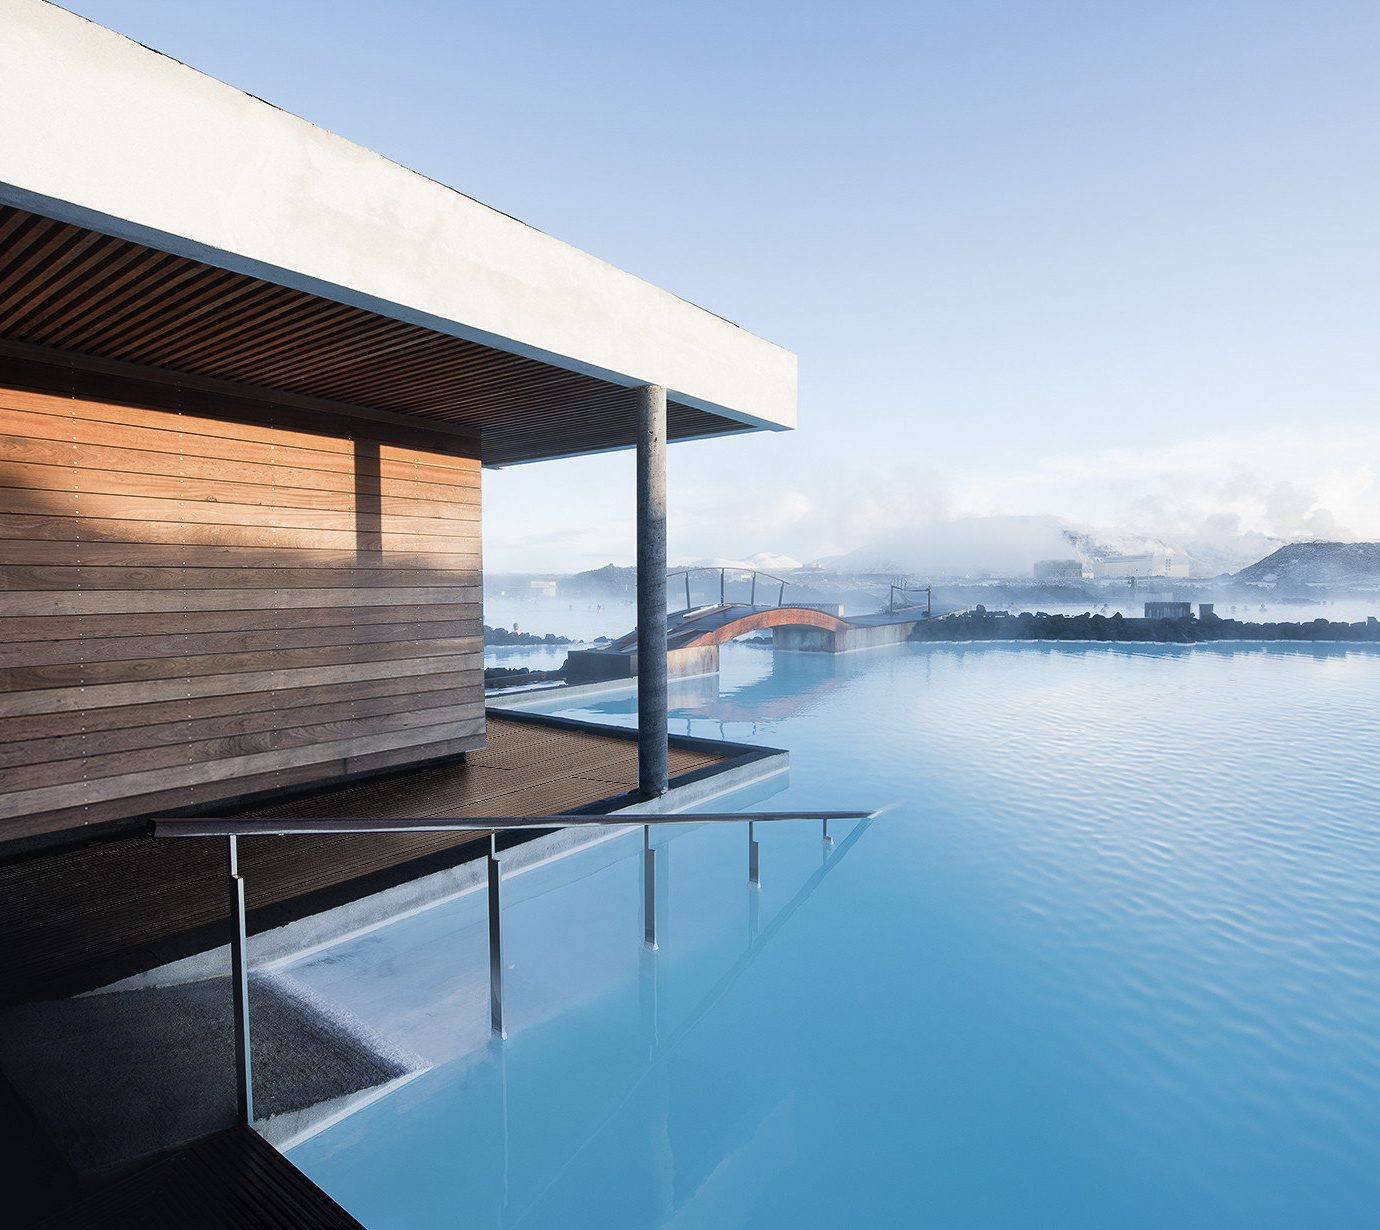 europe Hotels Iceland Trip Ideas reflection water Architecture sky house swimming pool real estate daylighting Sea building condominium facade window